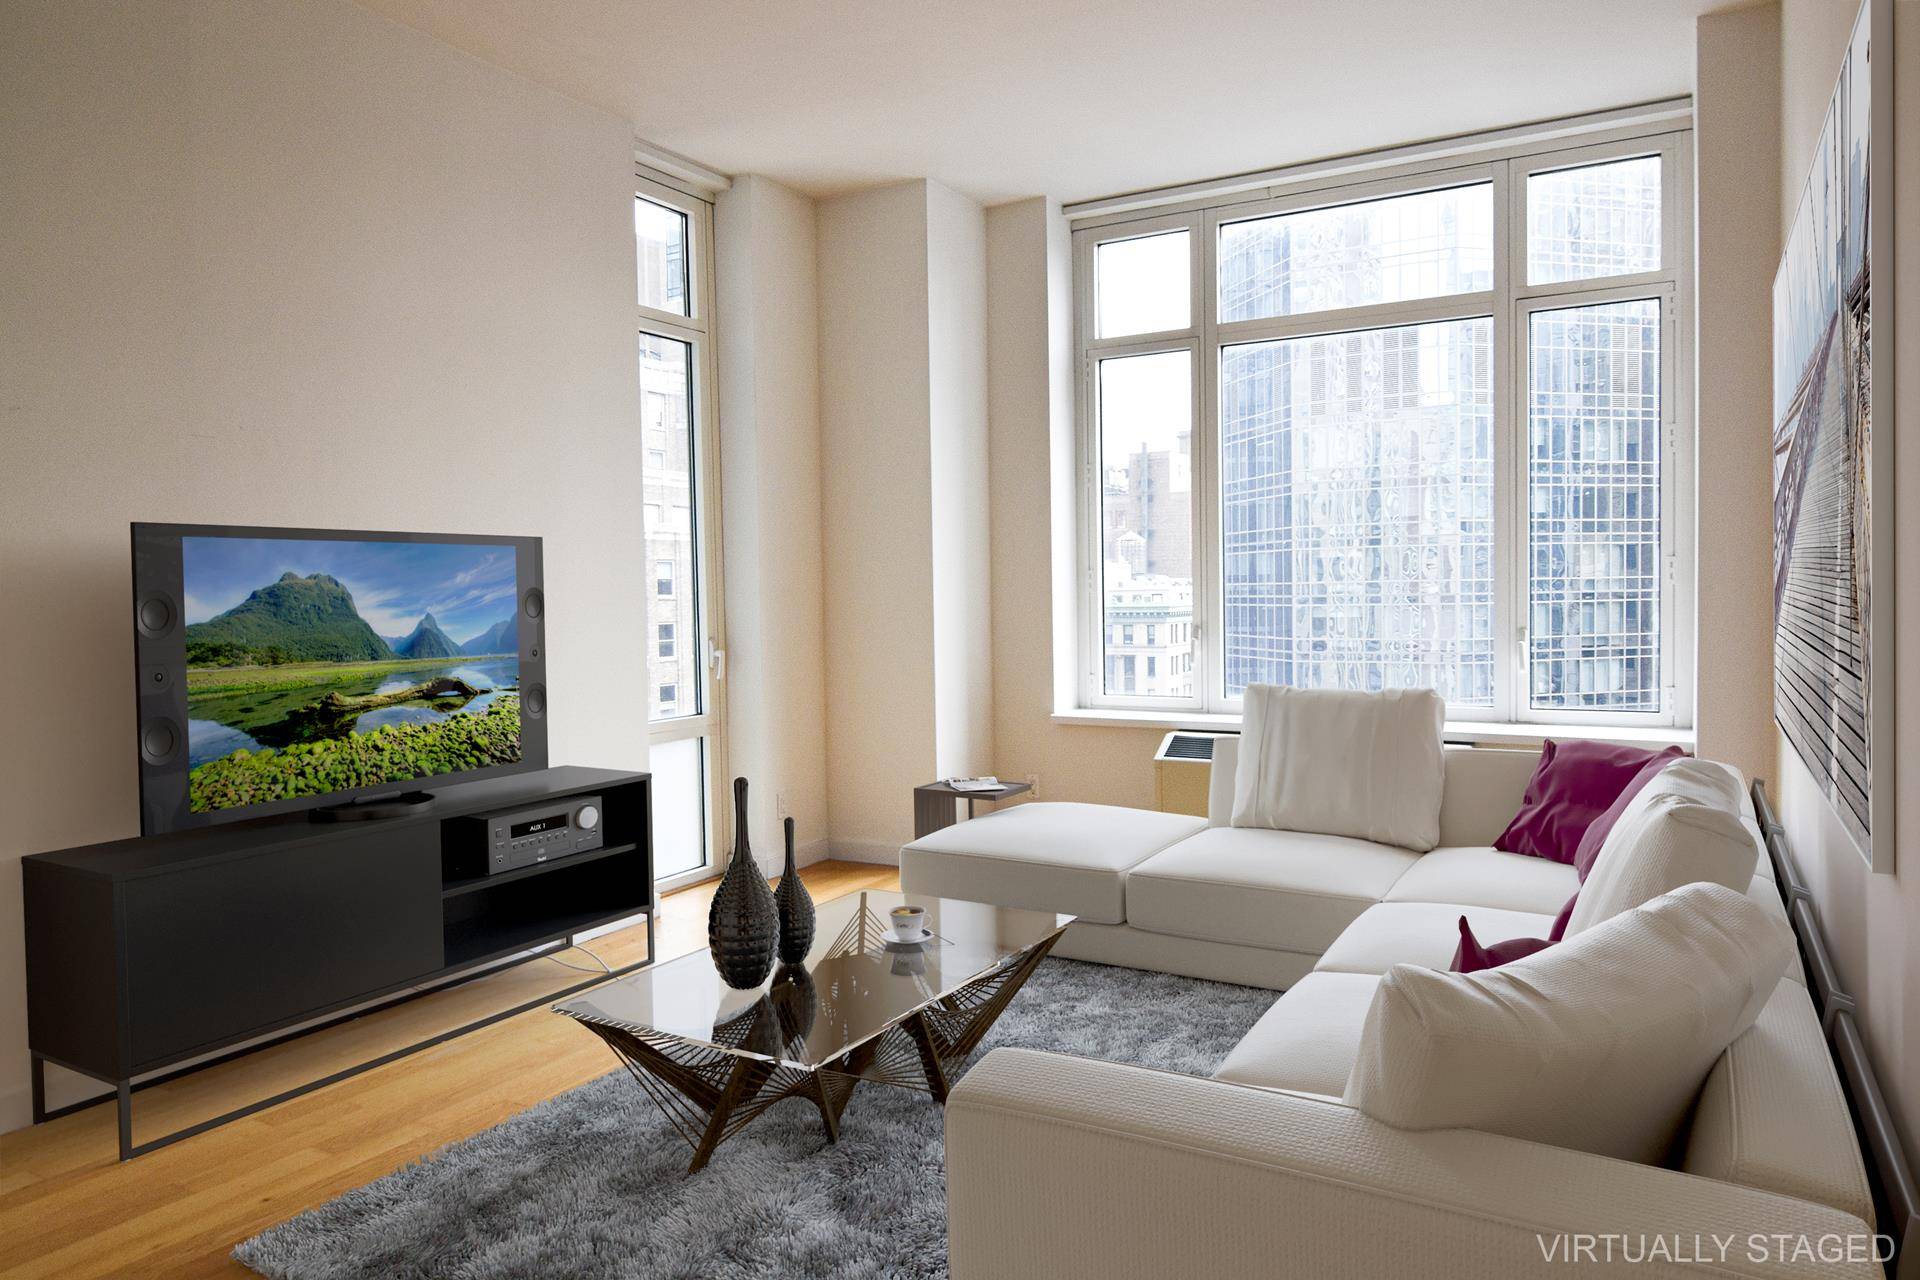 Live in style at the Luxurious 325 Fifth Avenue Condominium !